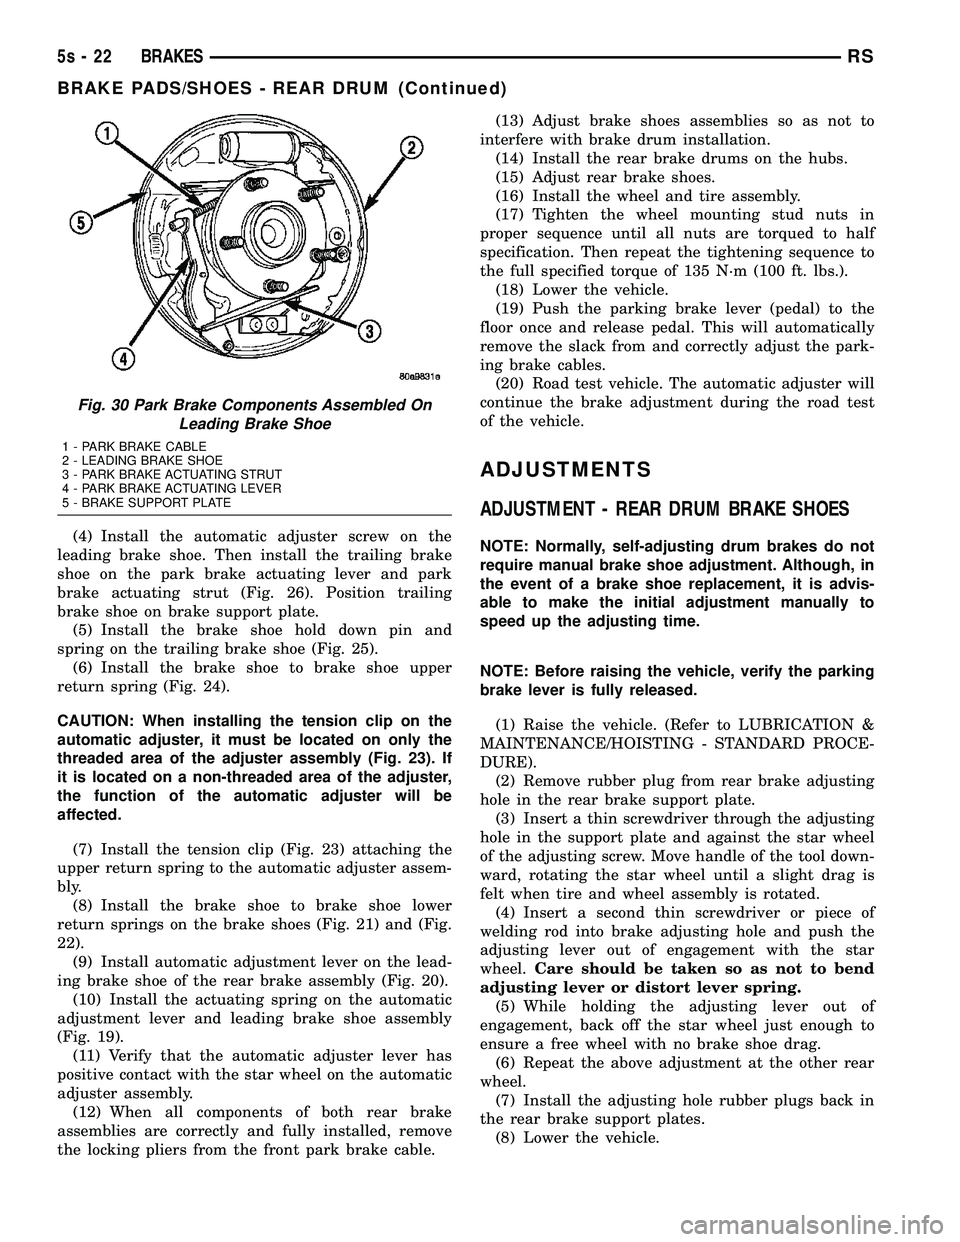 DODGE TOWN AND COUNTRY 2004  Service Manual (4) Install the automatic adjuster screw on the
leading brake shoe. Then install the trailing brake
shoe on the park brake actuating lever and park
brake actuating strut (Fig. 26). Position trailing
b